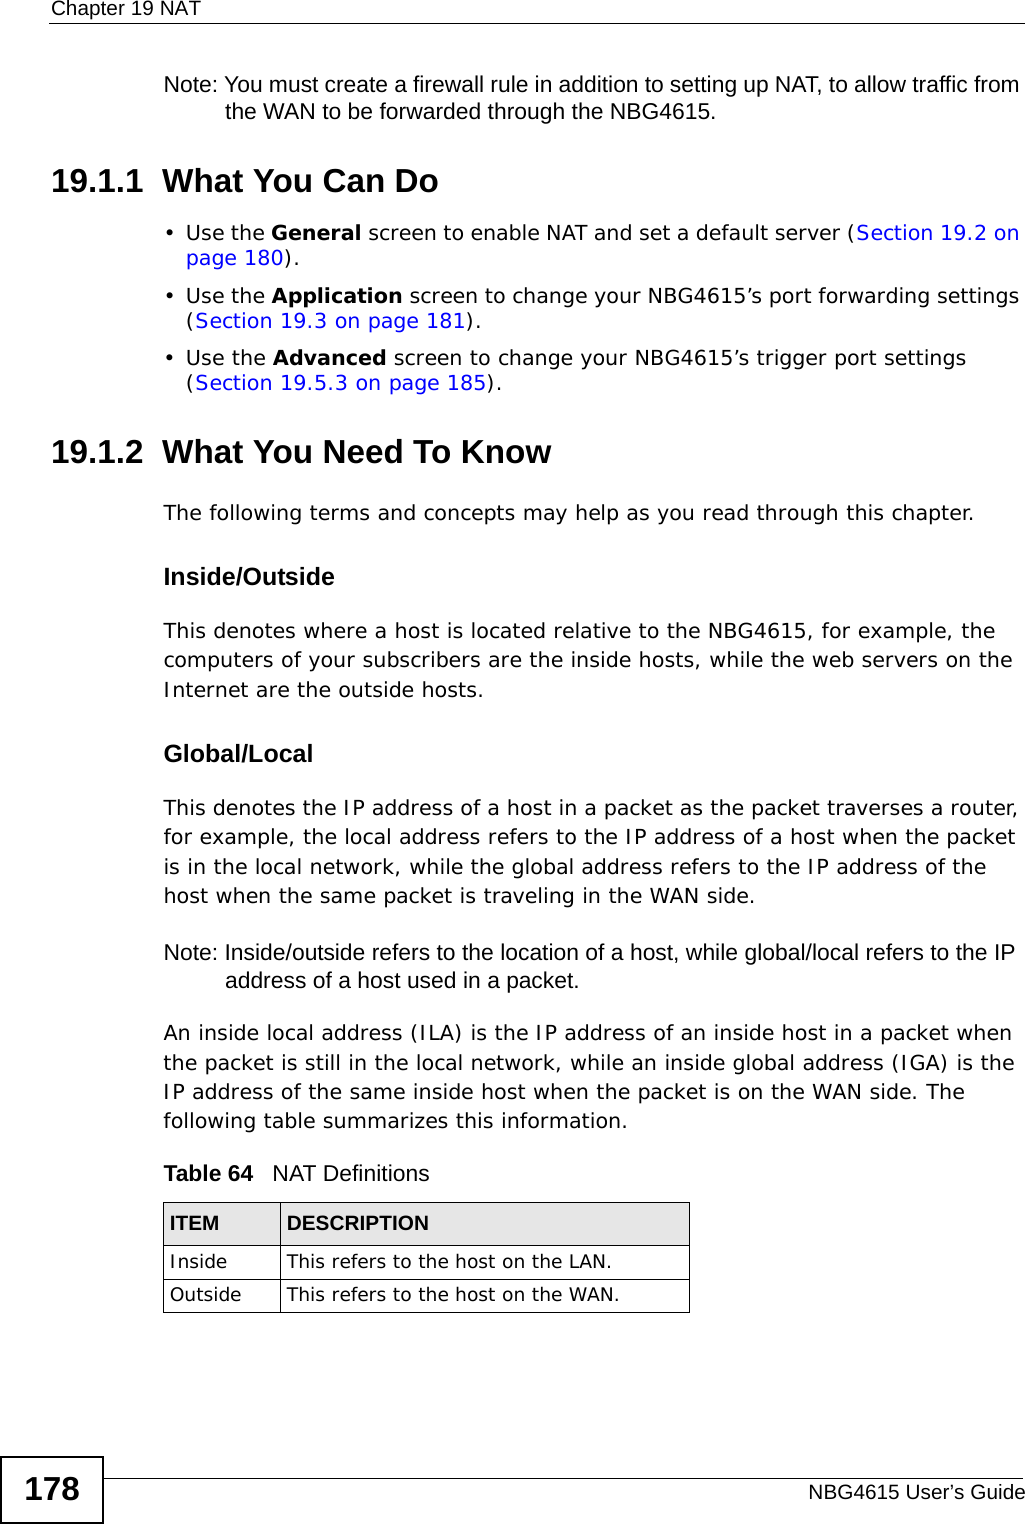 Chapter 19 NATNBG4615 User’s Guide178Note: You must create a firewall rule in addition to setting up NAT, to allow traffic from the WAN to be forwarded through the NBG4615.19.1.1  What You Can Do•Use the General screen to enable NAT and set a default server (Section 19.2 on page 180).•Use the Application screen to change your NBG4615’s port forwarding settings (Section 19.3 on page 181).•Use the Advanced screen to change your NBG4615’s trigger port settings (Section 19.5.3 on page 185).19.1.2  What You Need To KnowThe following terms and concepts may help as you read through this chapter.Inside/OutsideThis denotes where a host is located relative to the NBG4615, for example, the computers of your subscribers are the inside hosts, while the web servers on the Internet are the outside hosts. Global/Local This denotes the IP address of a host in a packet as the packet traverses a router, for example, the local address refers to the IP address of a host when the packet is in the local network, while the global address refers to the IP address of the host when the same packet is traveling in the WAN side. Note: Inside/outside refers to the location of a host, while global/local refers to the IP address of a host used in a packet. An inside local address (ILA) is the IP address of an inside host in a packet when the packet is still in the local network, while an inside global address (IGA) is the IP address of the same inside host when the packet is on the WAN side. The following table summarizes this information.Table 64   NAT DefinitionsITEM DESCRIPTIONInside This refers to the host on the LAN.Outside This refers to the host on the WAN.